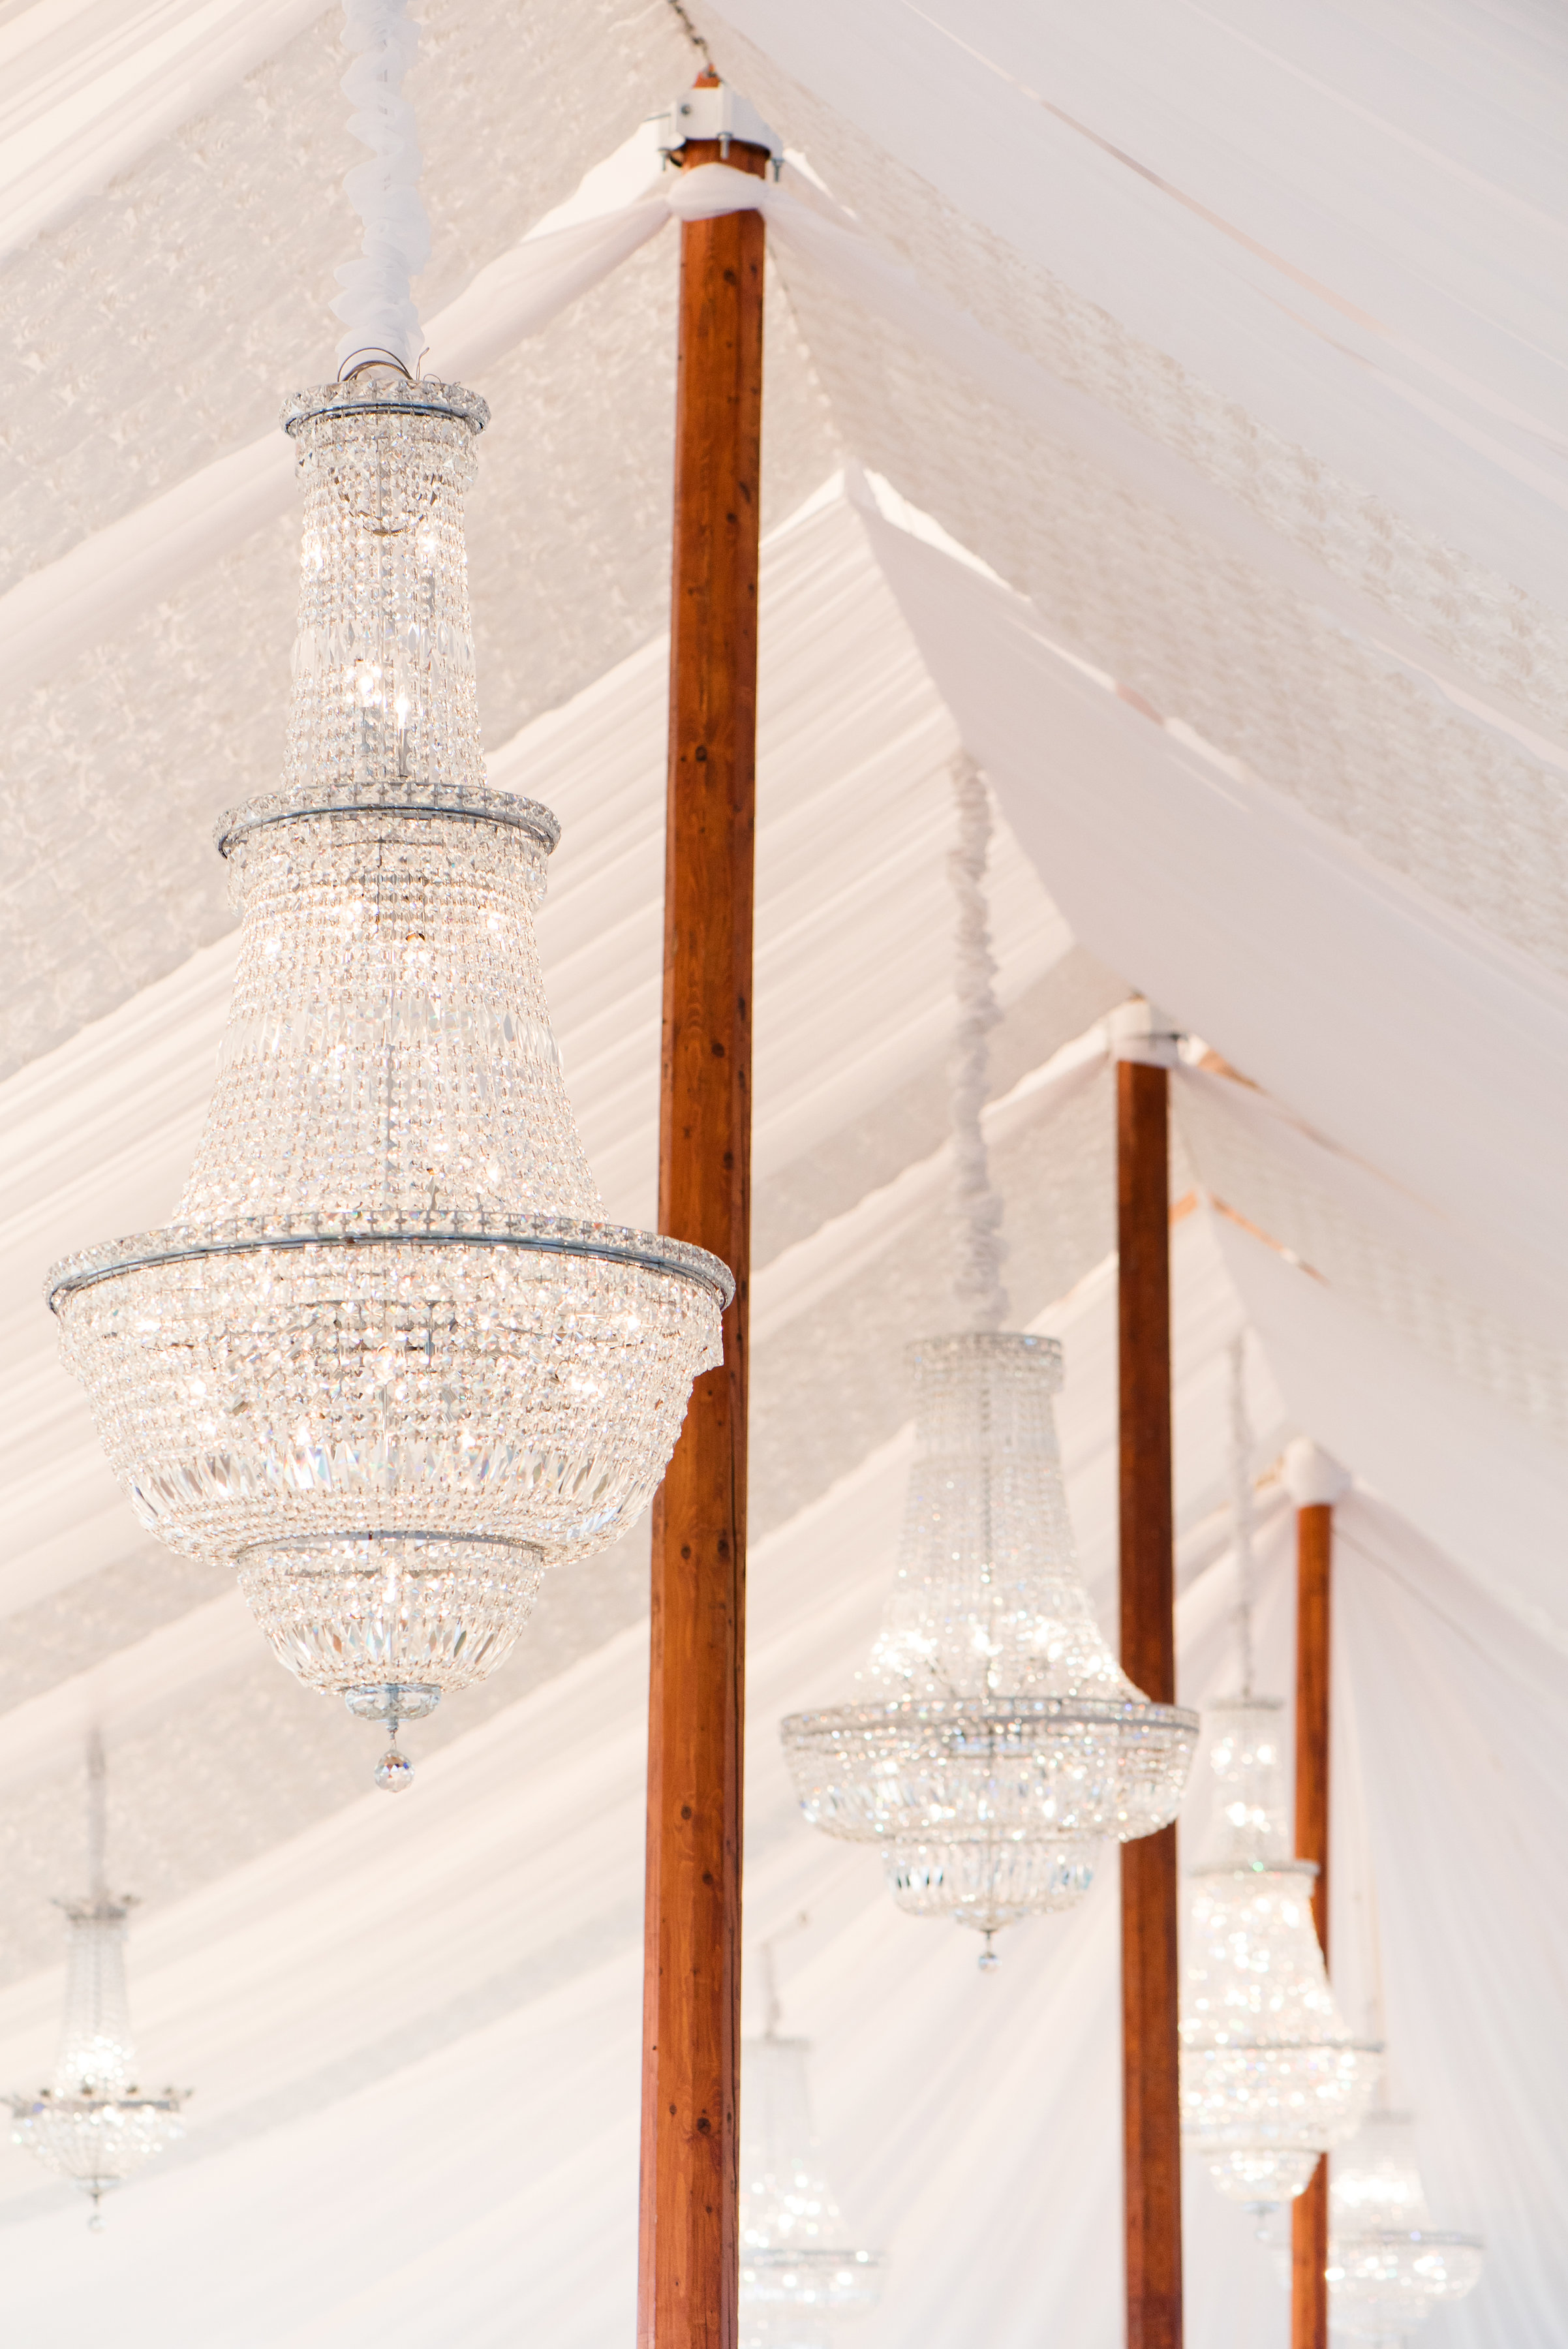 Romantic draped Sperry Tent with Chrystal Chandeliers via Jubilee Events